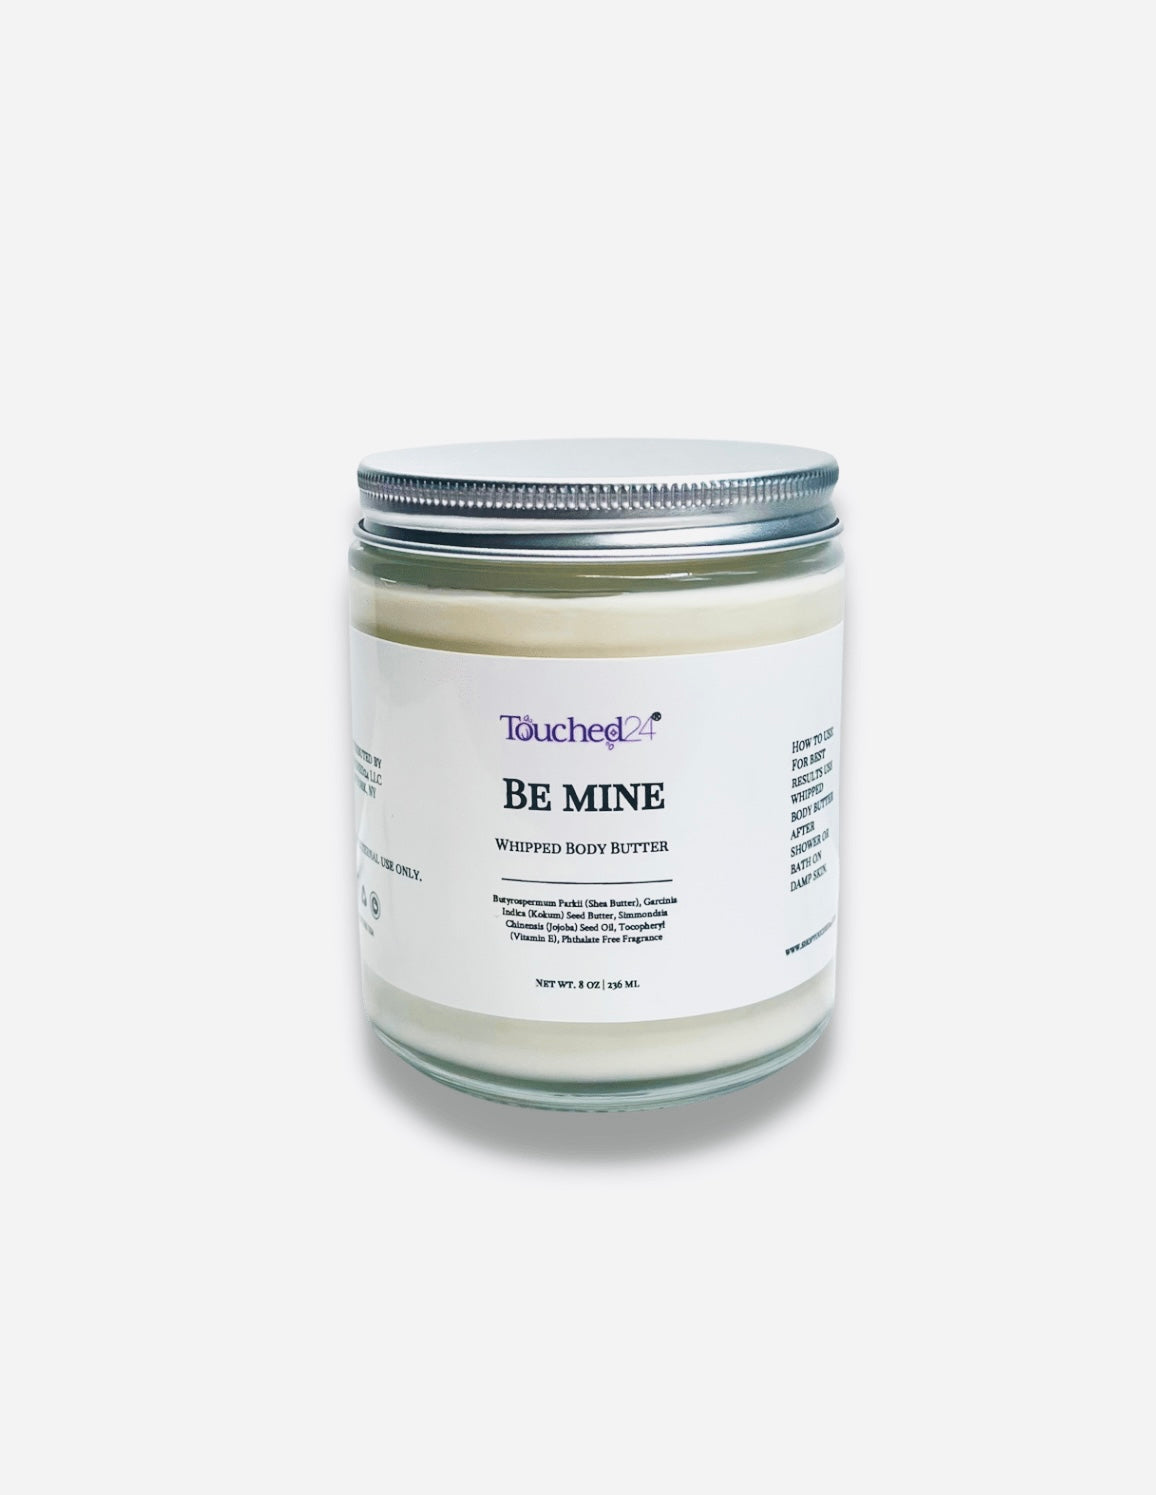 Be Mine Body Butter